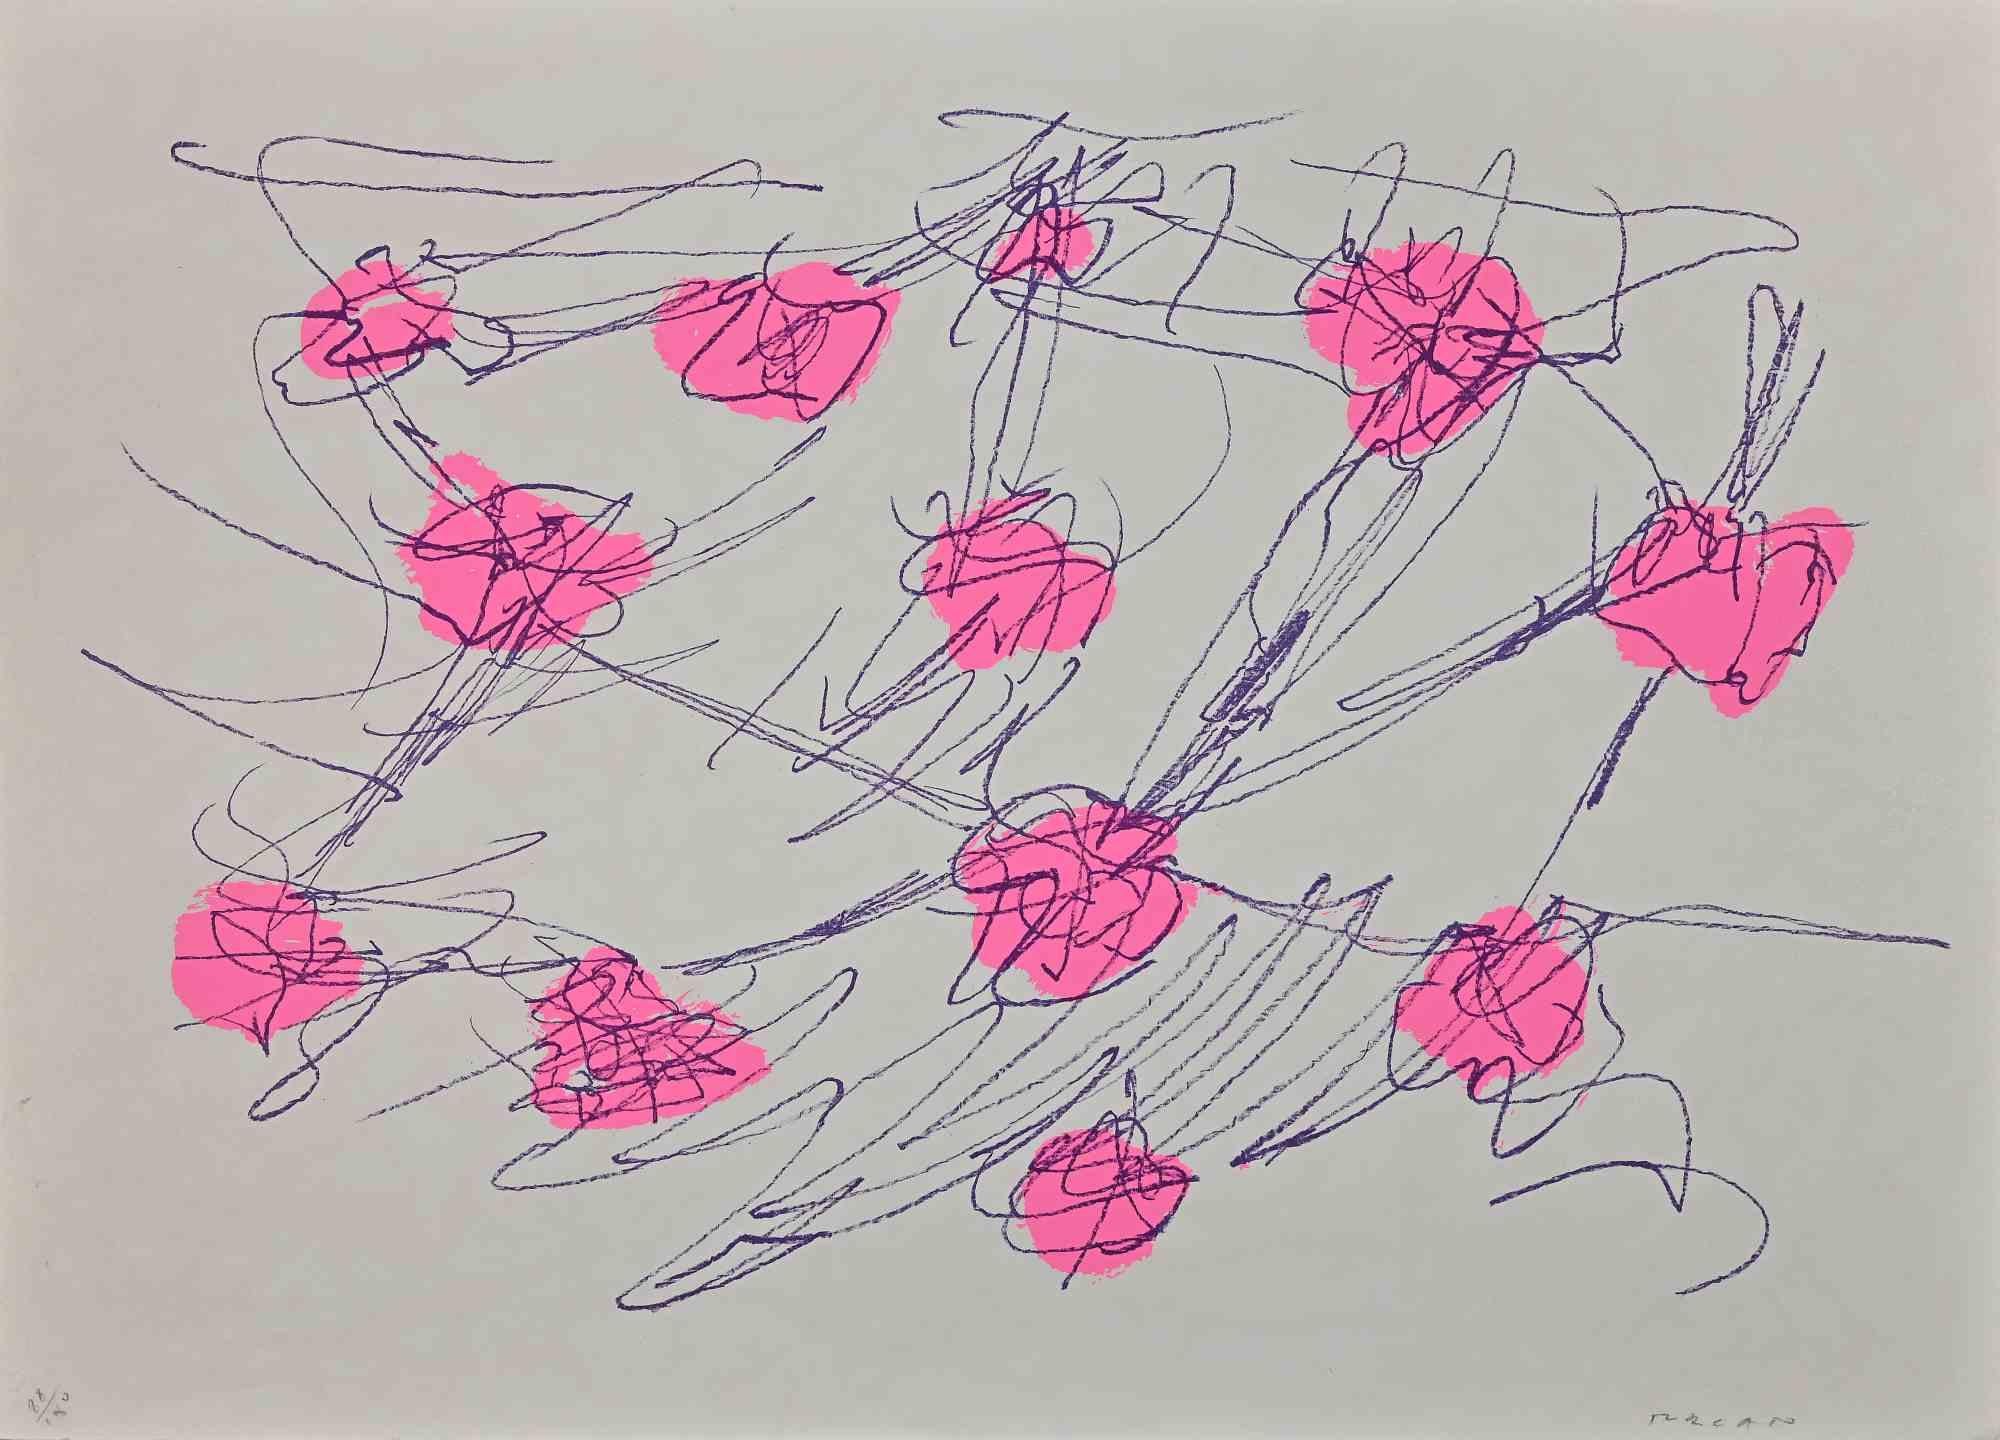 Abstract Composition is a colored screen print realized by the contemporary artist  Giulio Turcato in 1970s.

Hand-signed in pencil on the lower right.

Numbered on the lower left margin, edition 88/100.

Good conditions.

Giulio Turcato  (1912 -